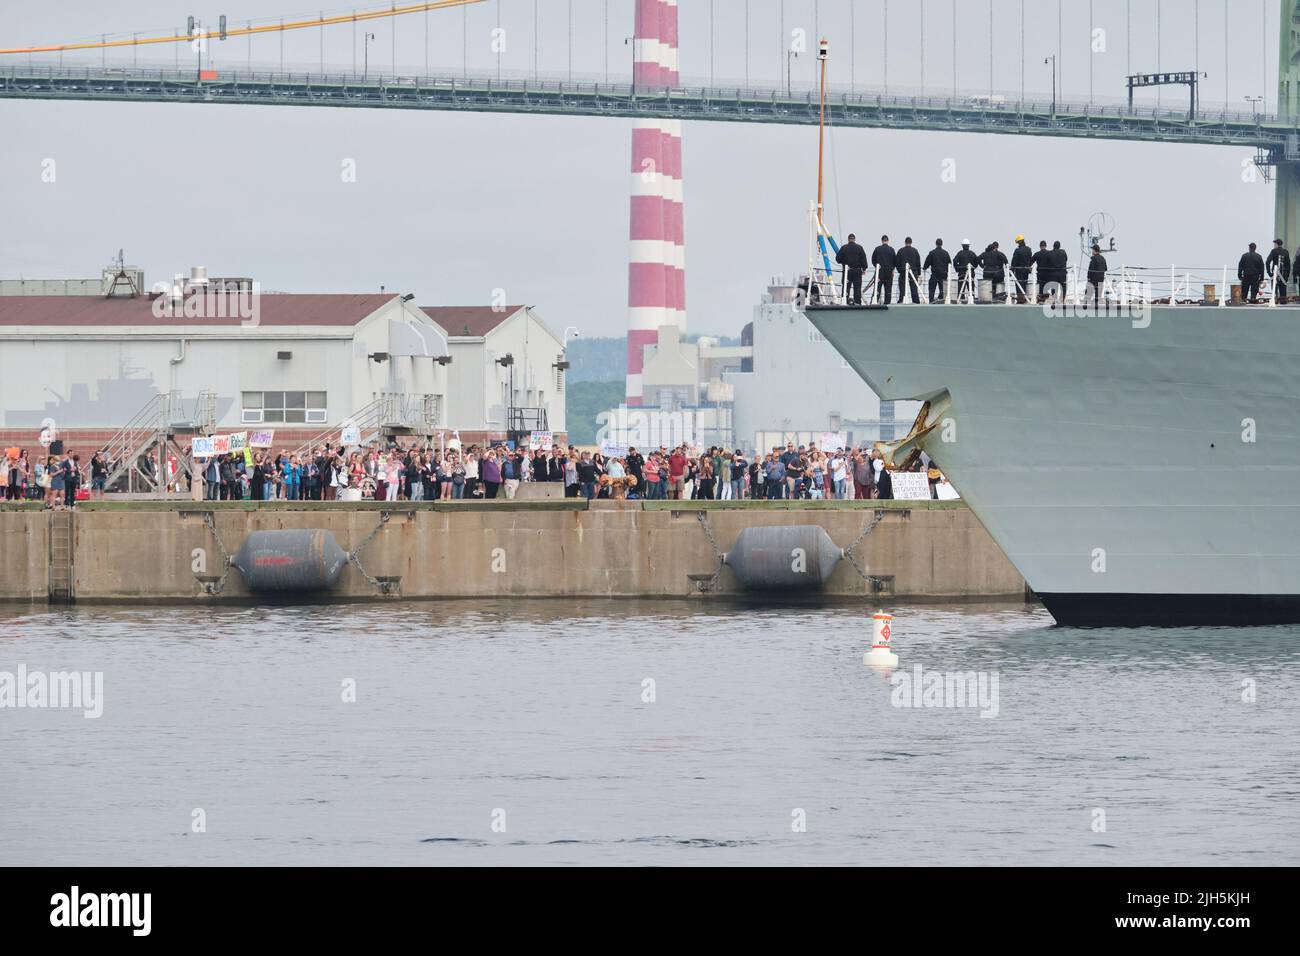 Halifax, Canada. July 15th, 2022. The HMCS Halifax (330) and HMCS Montréal (336) return to the Halifax base from a European NATO missions, after deploying to central and eastern European waters as part of NATO's Operation Reassurance. Credit: meanderingemu/Alamy Live News Stock Photo